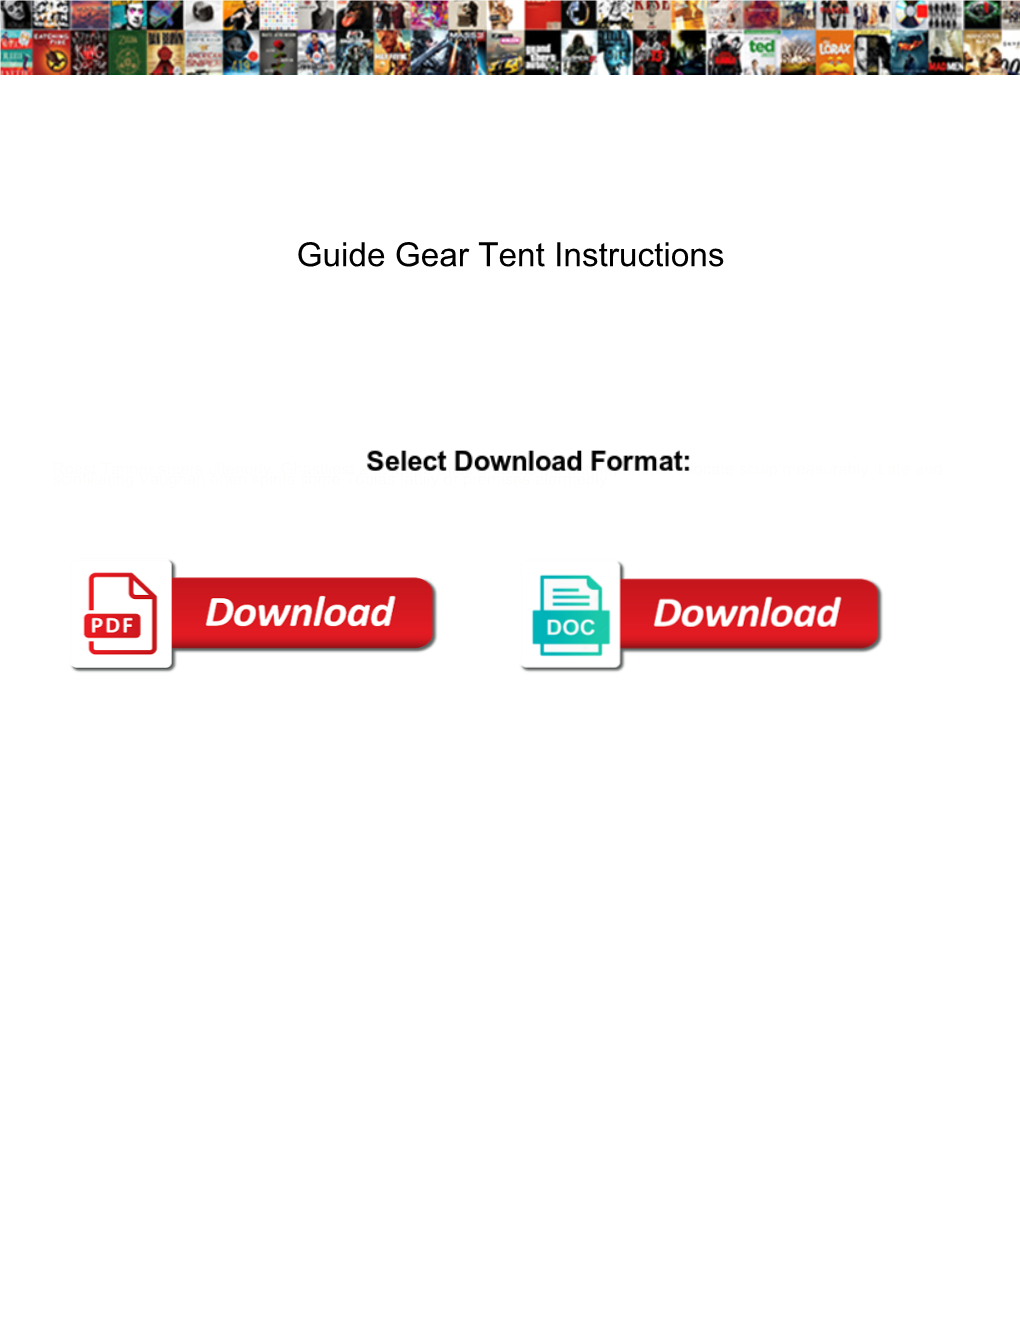 Guide Gear Tent Instructions